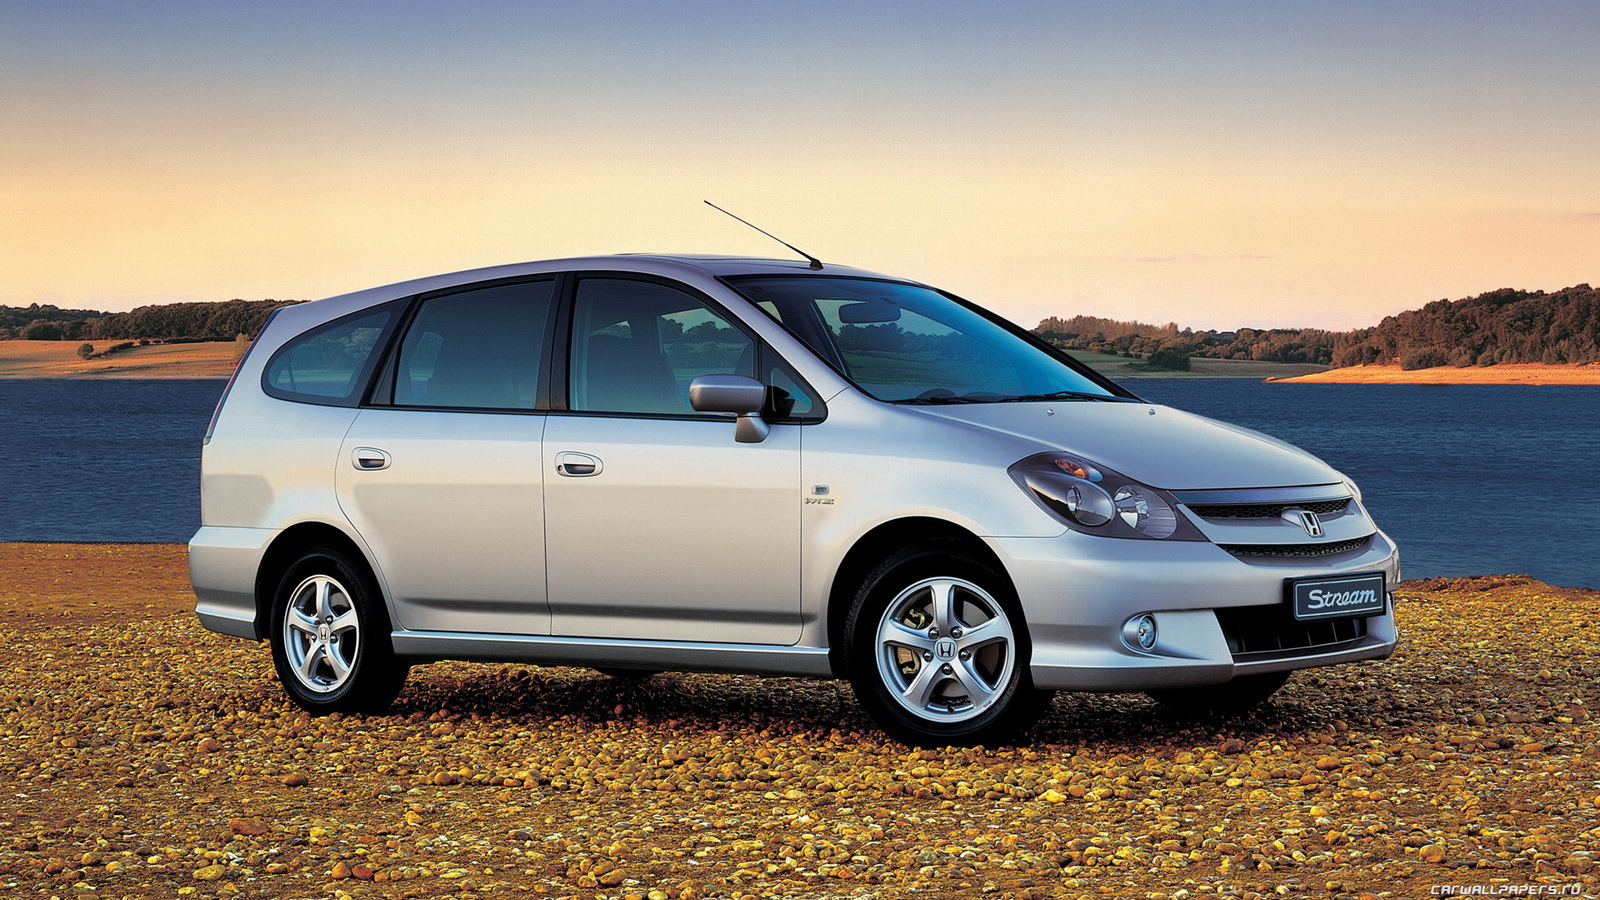 Honda Stream technical specifications and fuel economy